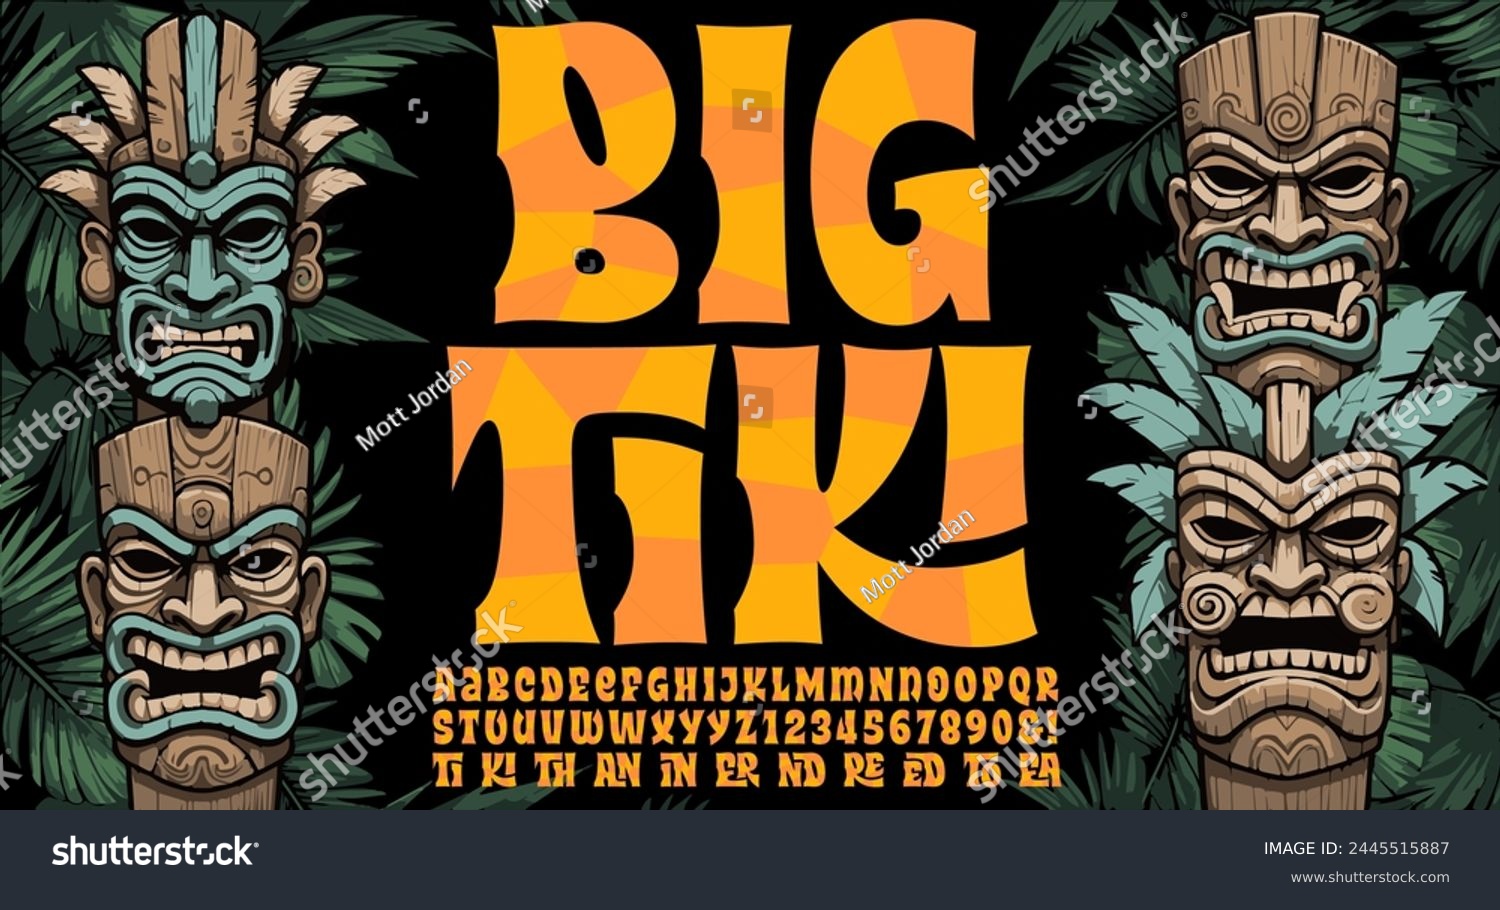 SVG of Big Tiki is a stylized alphabet with ligatures; includes four tiki head illustrations and palm leaves svg